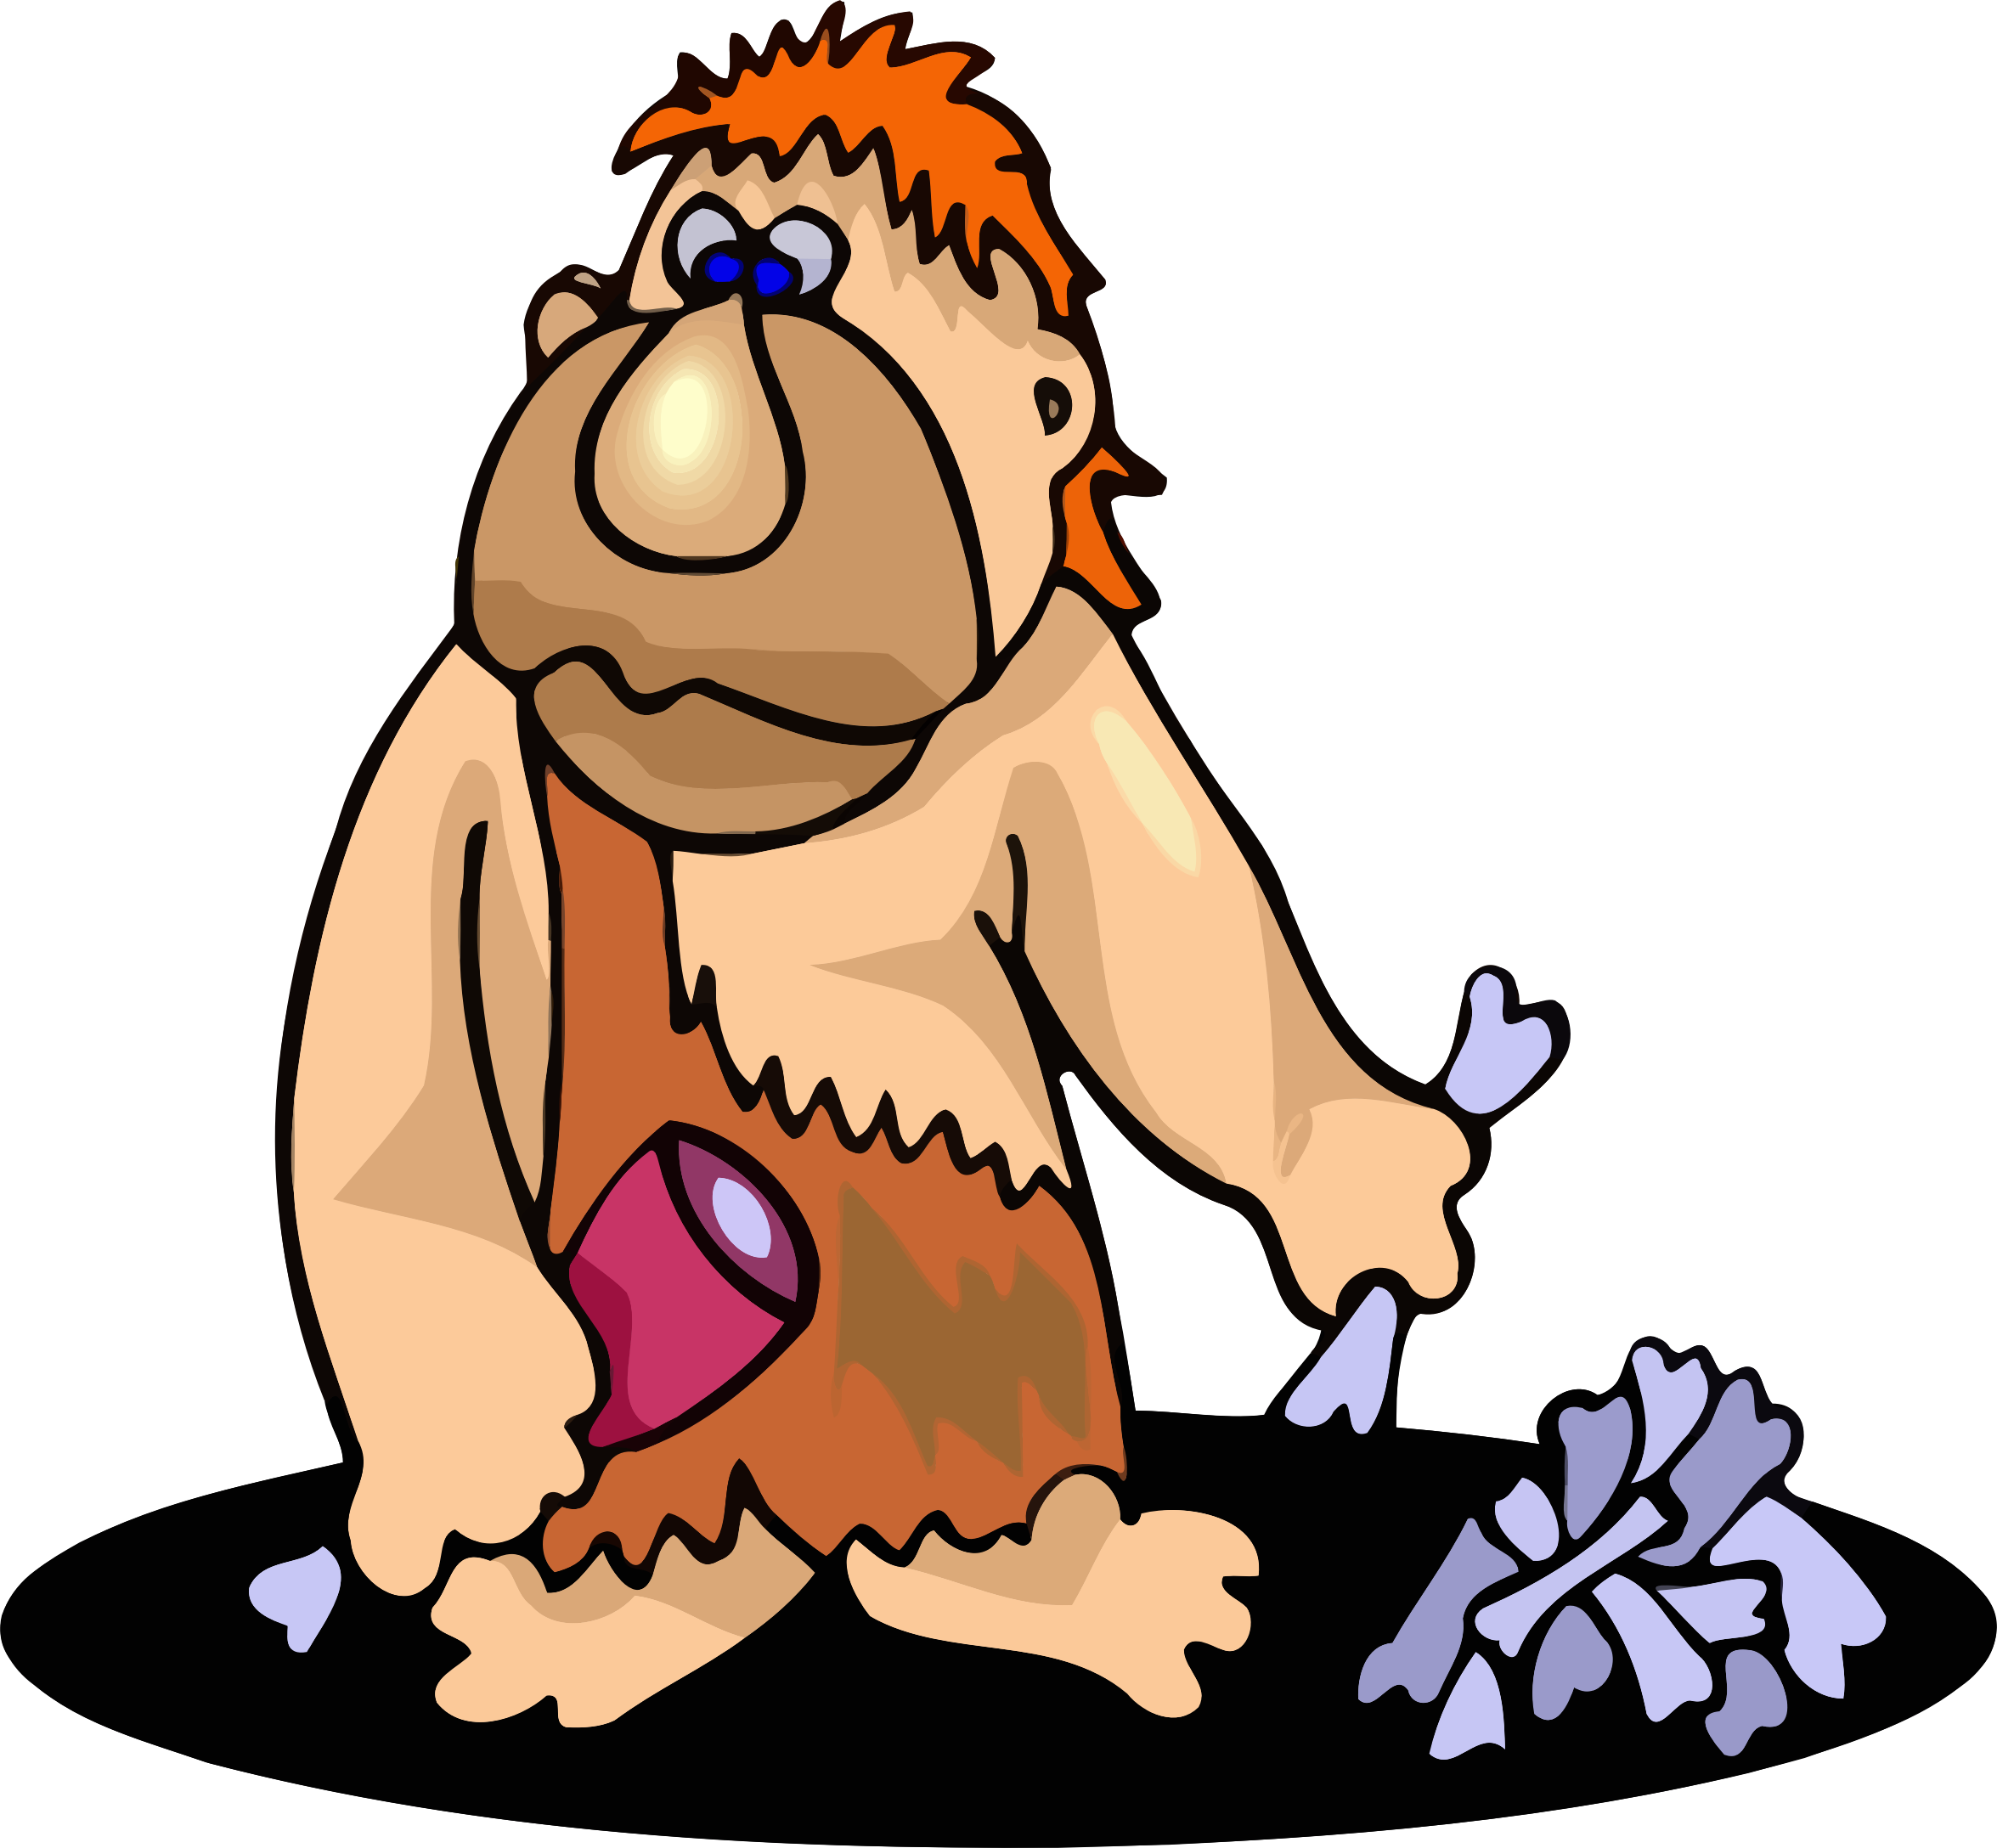 humans clipart stone age man